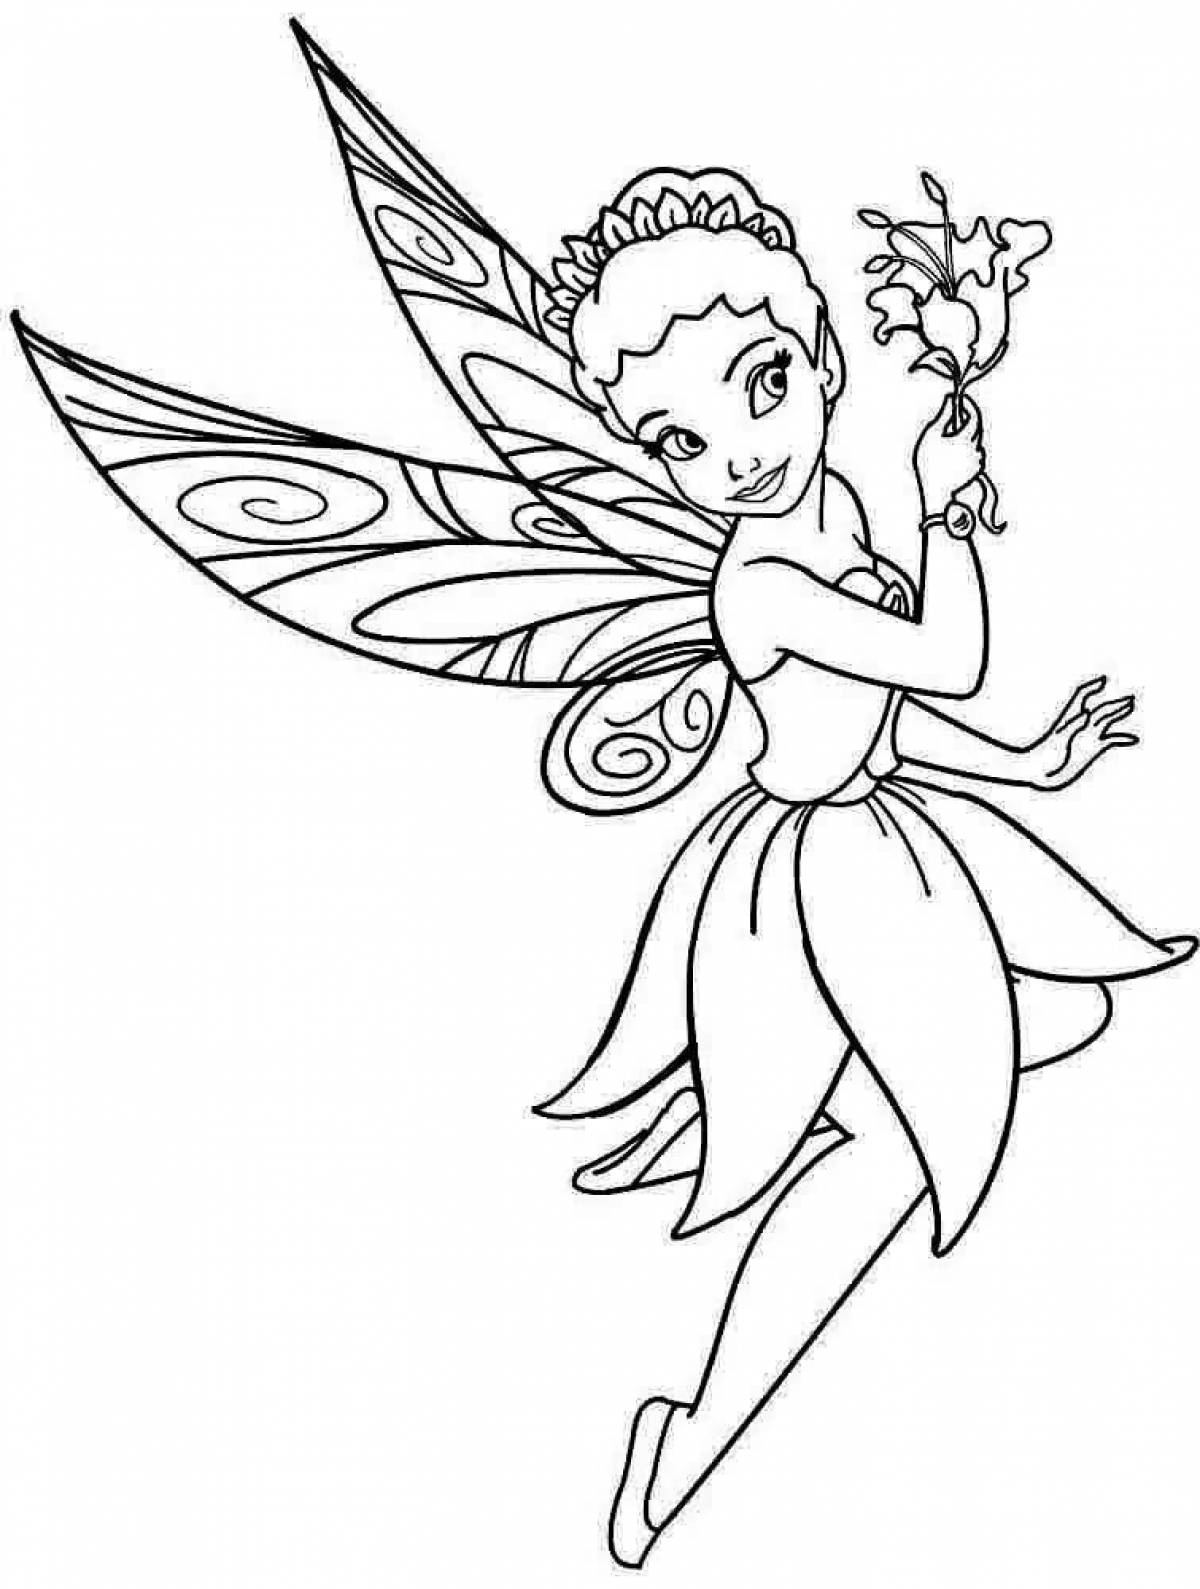 Amazing coloring pages with fairies